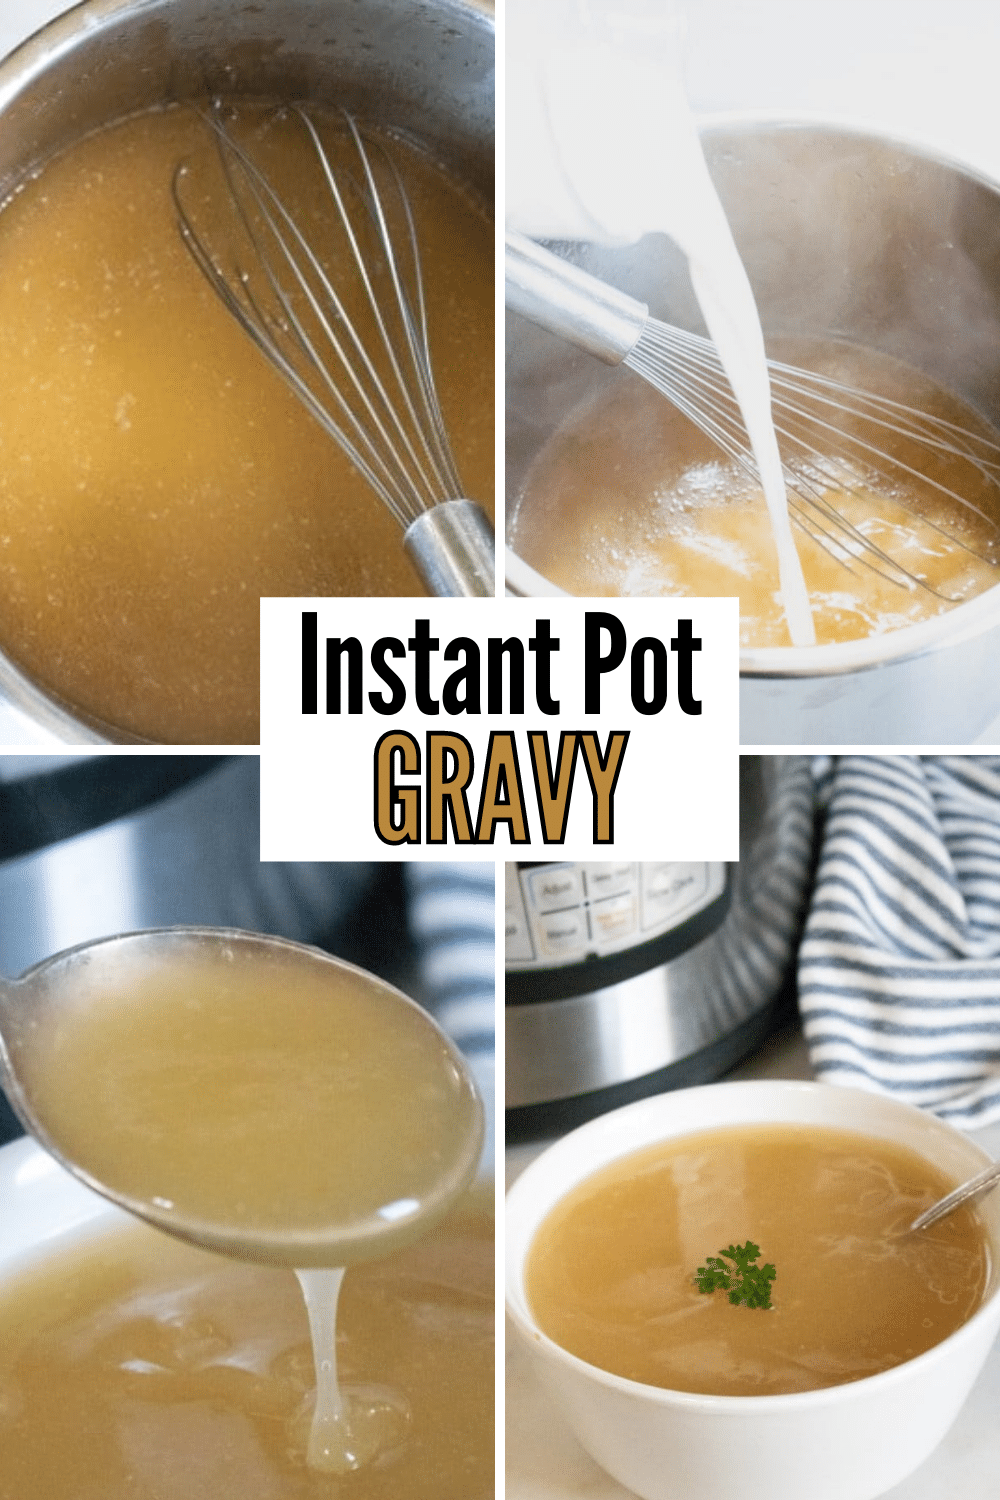 Two great reasons to make Instant Pot Gravy -- fewer dirty dishes + gravy stays warms until you're ready to serve it! #Thanksgiving #InstantPot #recipes #gravy via @wondermomwannab